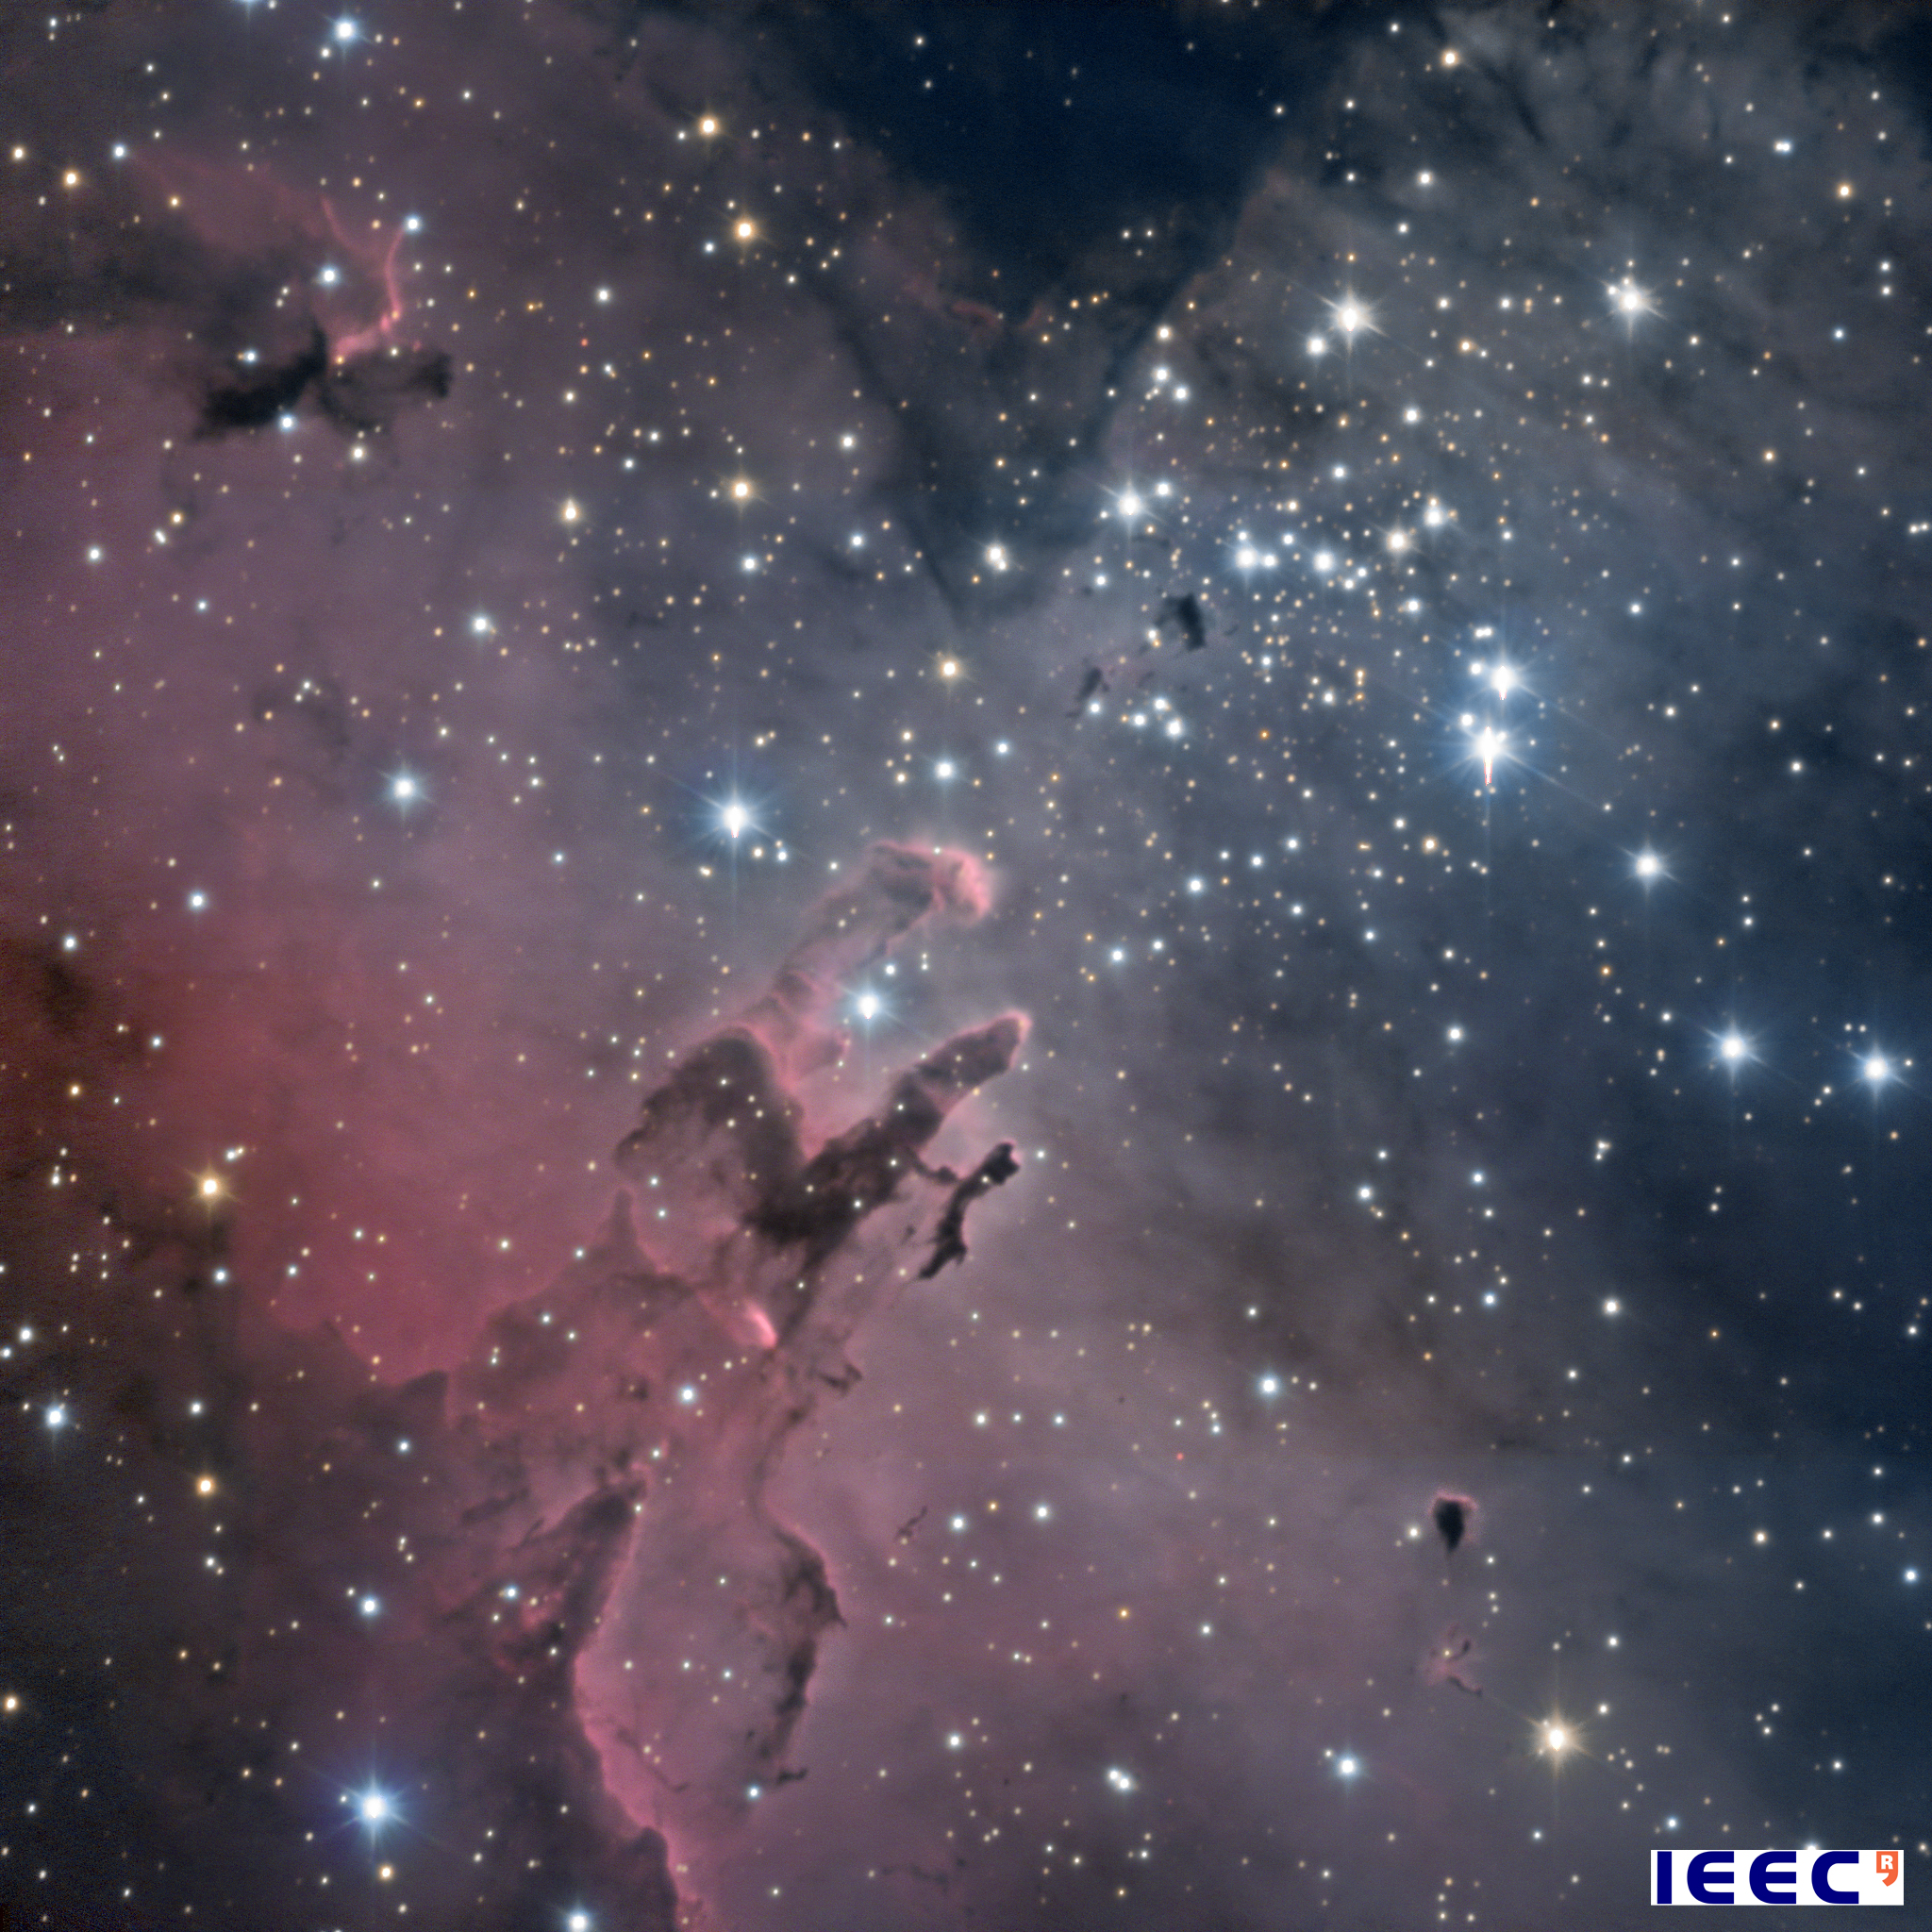 The Pillars of Creation, picture of June of the Observatori Astronòmic del Montsec